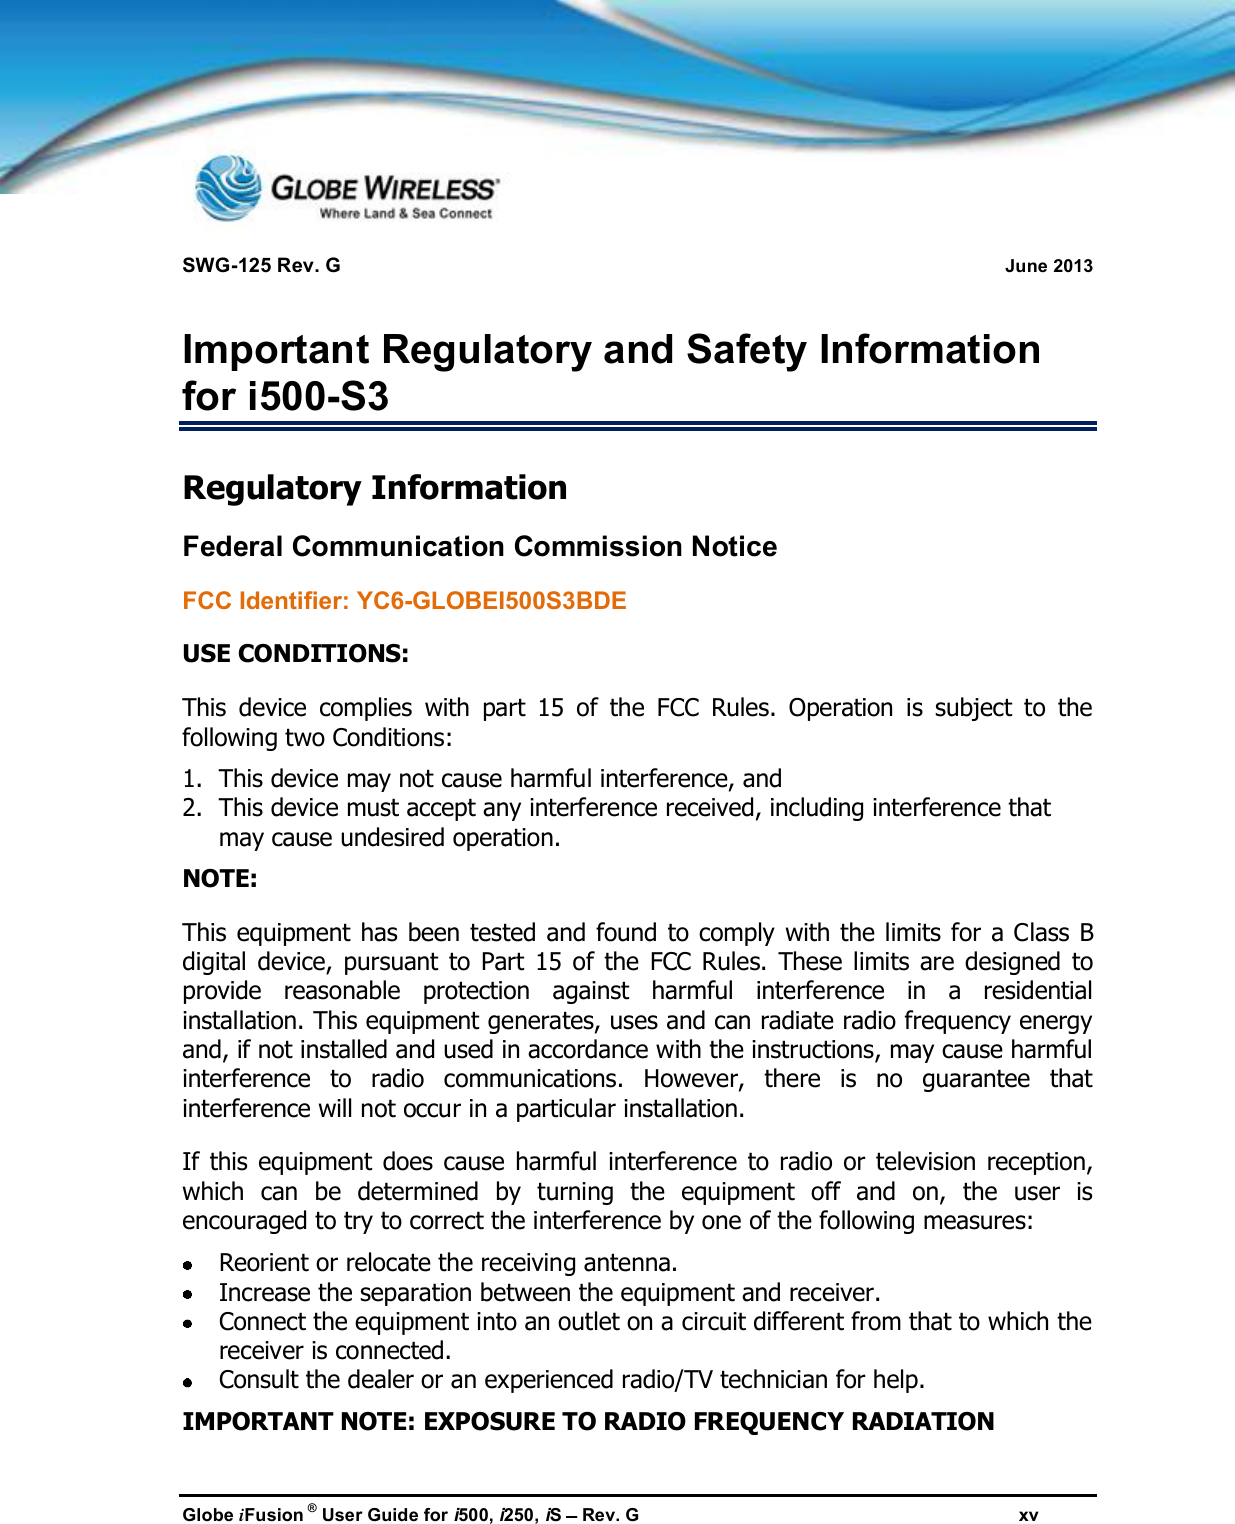 SWG-125 Rev. G June 2013Globe iFusion ®User Guide for i500, i250, iSRev. G xvImportant Regulatory and Safety Informationfor i500-S3Regulatory InformationFederal Communication Commission NoticeFCC Identifier: YC6-GLOBEI500S3BDEUSE CONDITIONS:This device complies with part 15 of the FCC Rules. Operation is subject to thefollowing two Conditions:1. This device may not cause harmful interference, and2. This device must accept any interference received, including interference thatmay cause undesired operation.NOTE:This equipment has been tested and found to comply with the limits for a Class Bdigital device, pursuant to Part 15 of the FCC Rules. These limits are designed toprovide reasonable protection against harmful interference in a residentialinstallation. This equipment generates, uses and can radiate radio frequency energyand, if not installed and used in accordance with the instructions, may cause harmfulinterference to radio communications. However, there is no guarantee thatinterference will not occur in a particular installation.If this equipment does cause harmful interference to radio or television reception,which can be determined by turning the equipment off and on, the user isencouraged to try to correct the interference by one of the following measures:Reorient or relocate the receiving antenna.Increase the separation between the equipment and receiver.Connect the equipment into an outlet on a circuit different from that to which thereceiver is connected.Consult the dealer or an experienced radio/TV technician for help.IMPORTANT NOTE: EXPOSURE TO RADIO FREQUENCY RADIATION